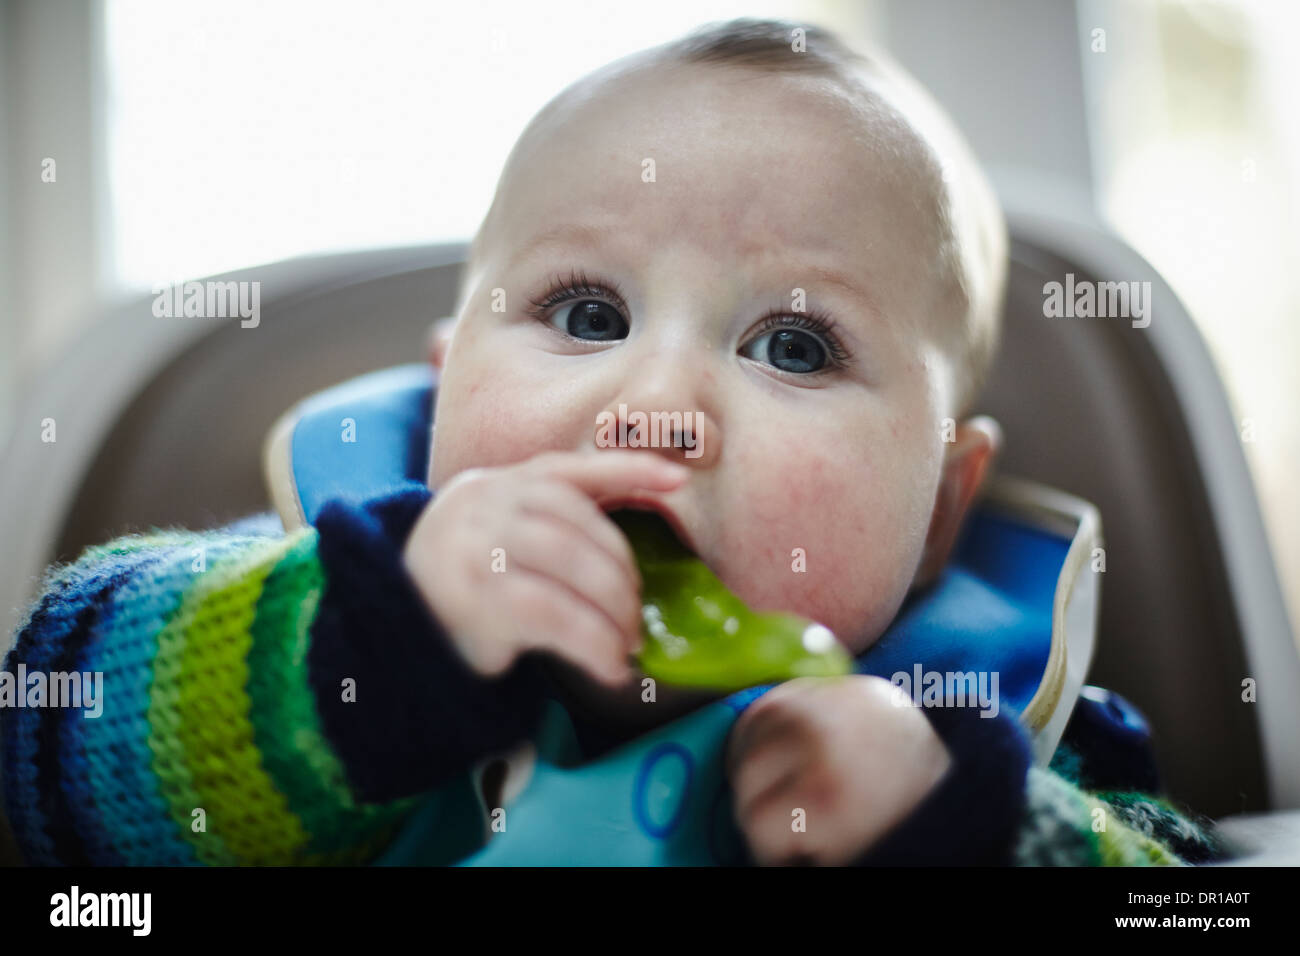 A baby around 5 and a half months eats a green vegetable as part of baby led weaning Stock Photo